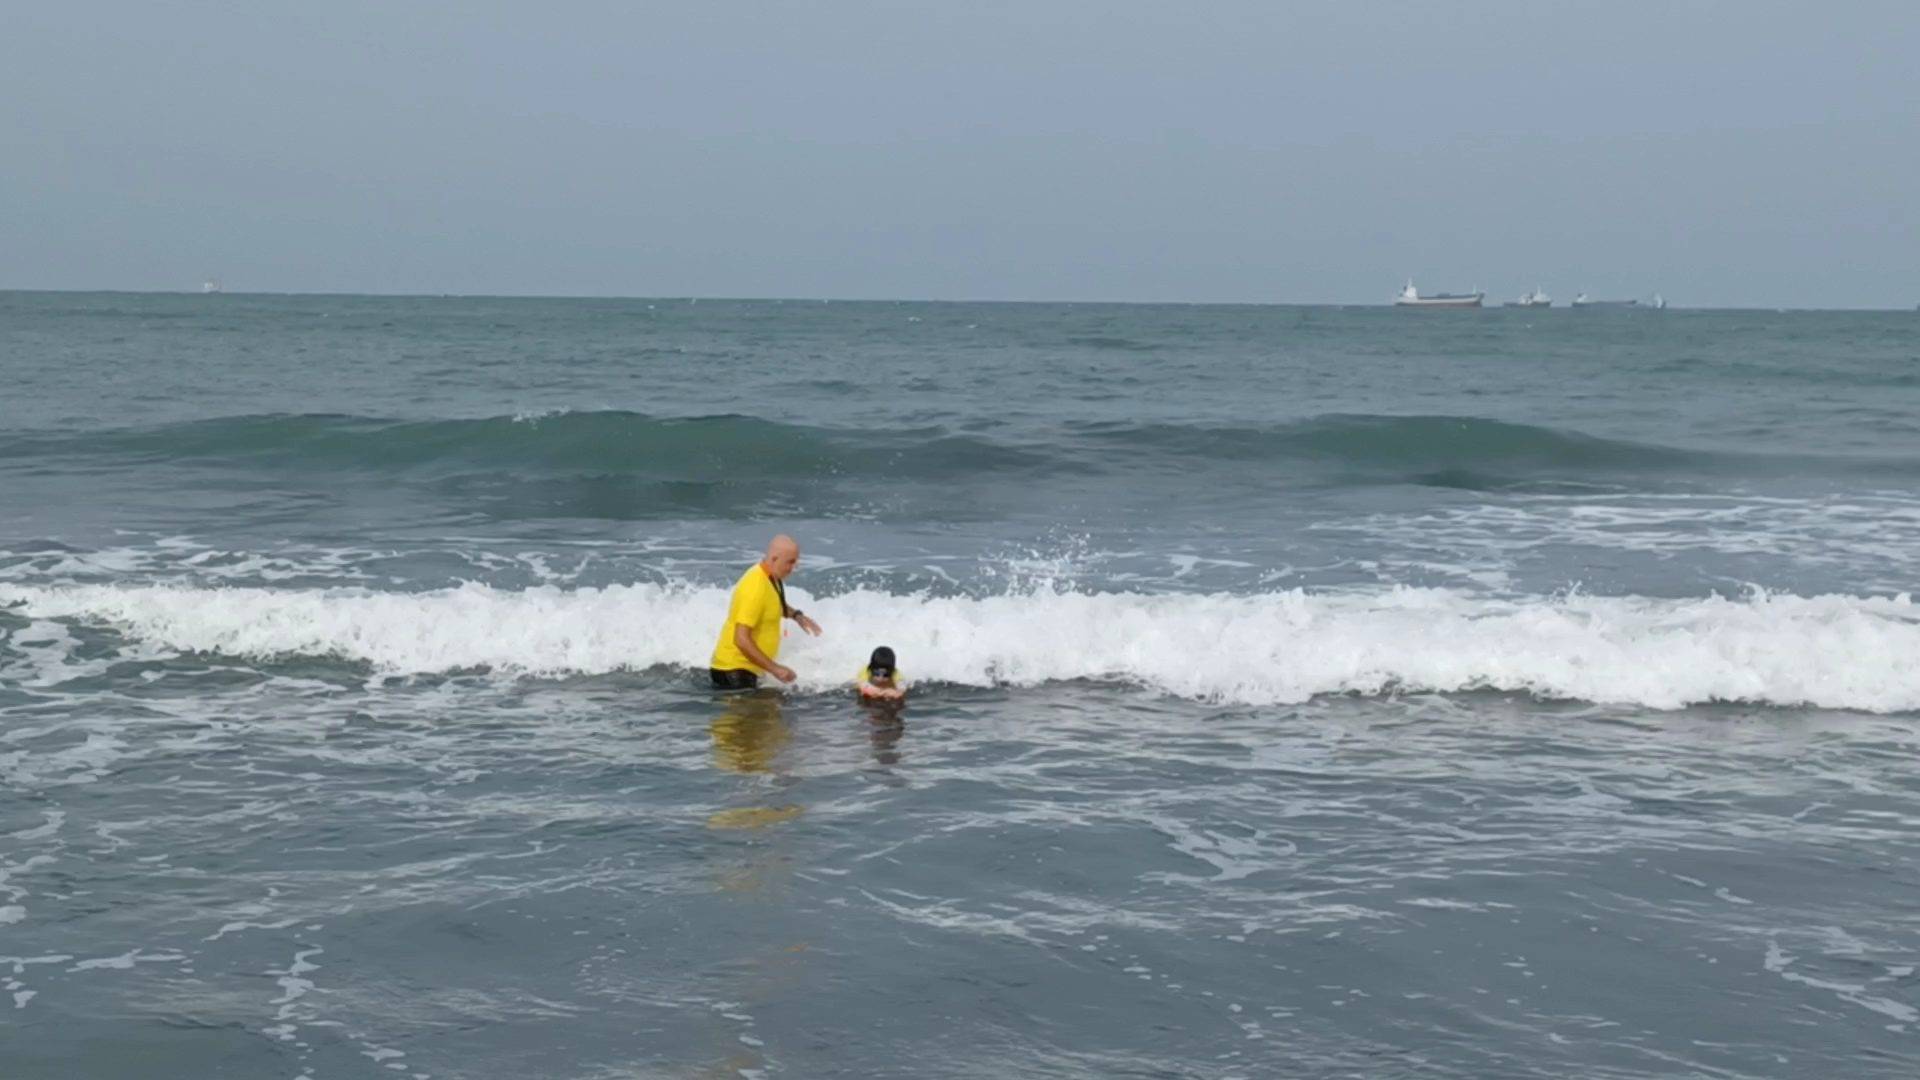 West Bay Nippers Lifesaving Taiwan Surf swim safety lesson. Coach and children bodysurfing and wading.